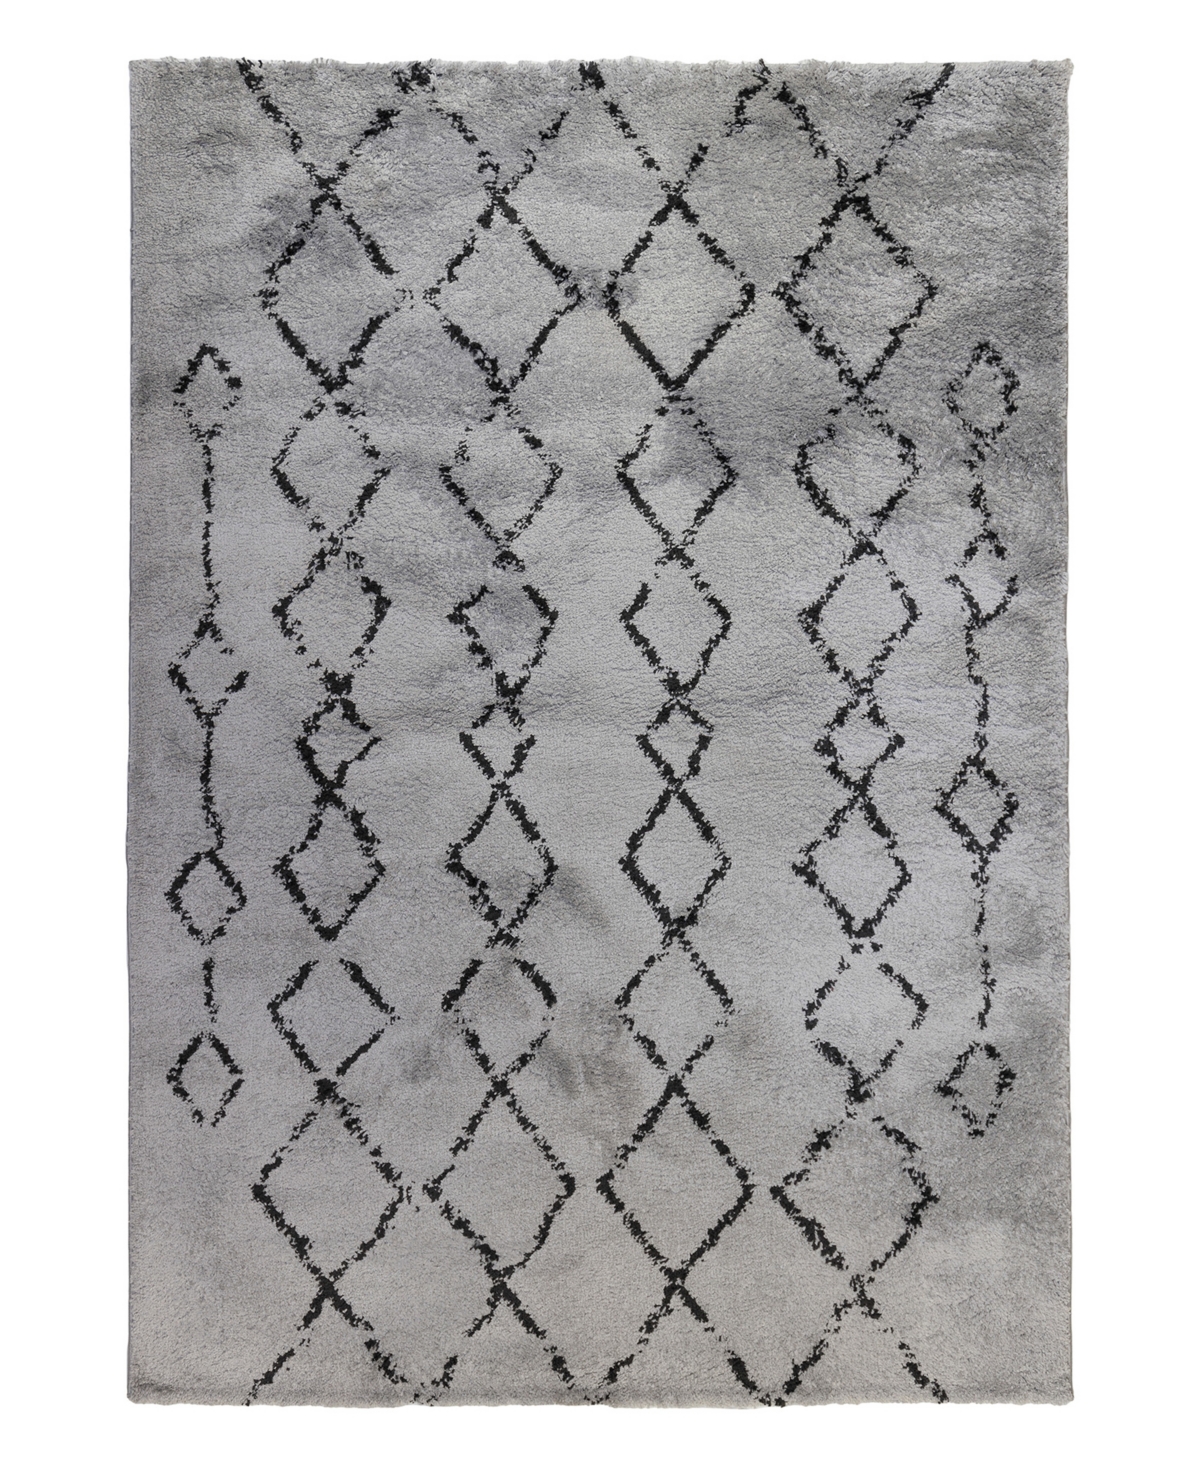 Amer Rugs Asp4 5' X 7'6" Area Rug In Gray/black